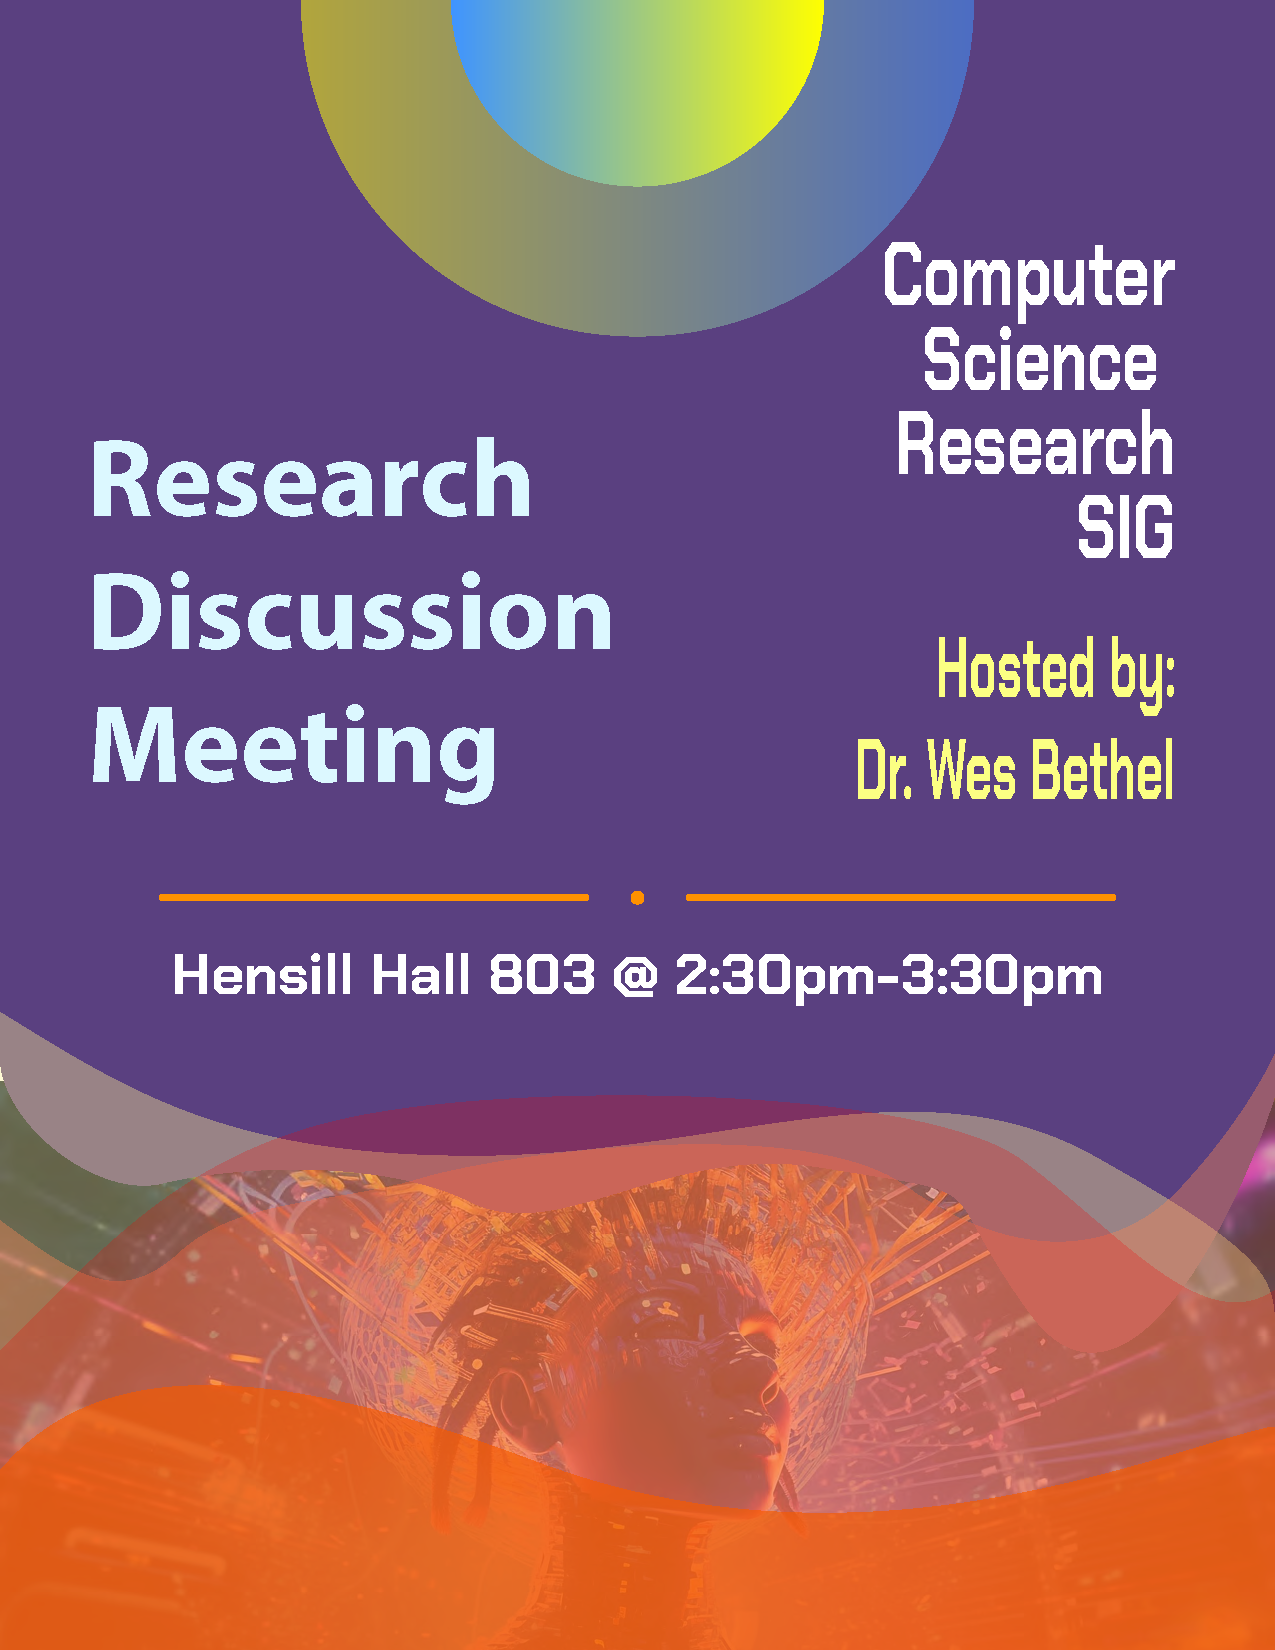 CS research SIG Event